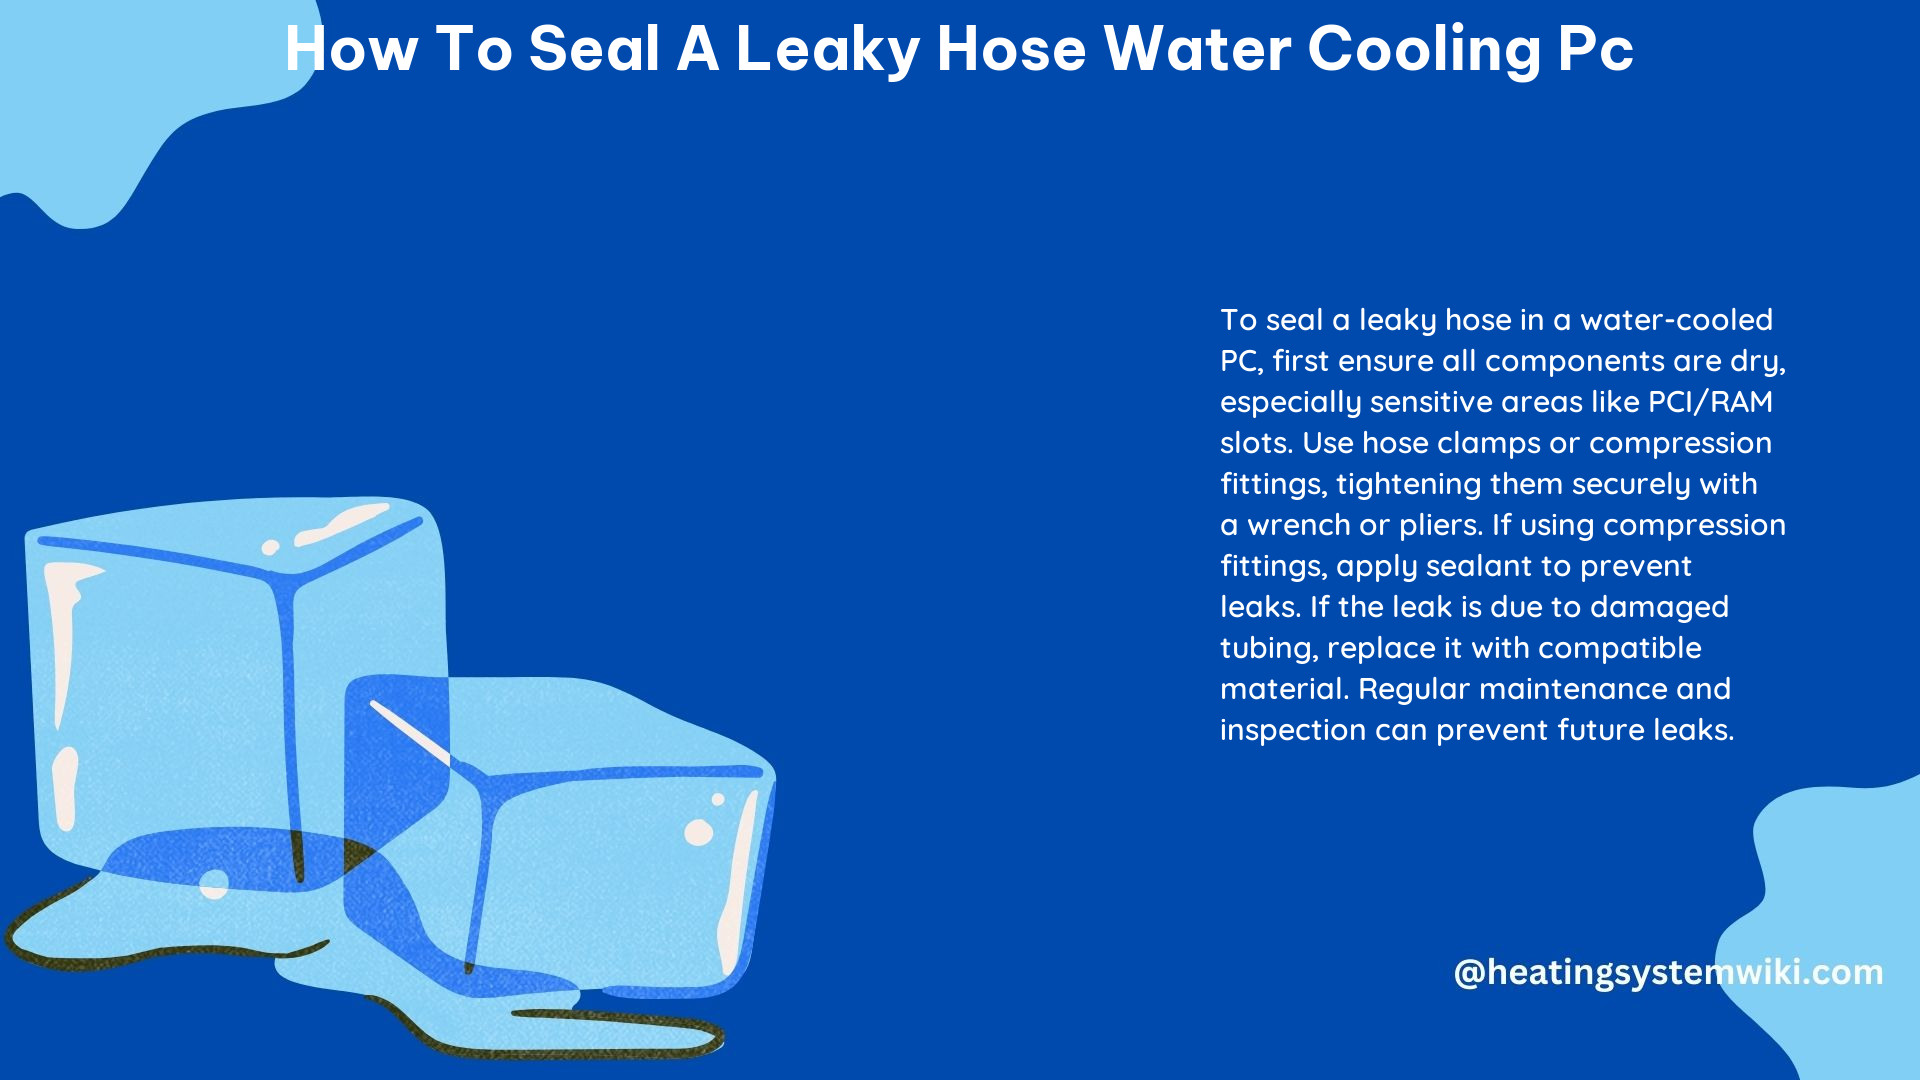 How to Seal a Leaky Hose Water Cooling PC